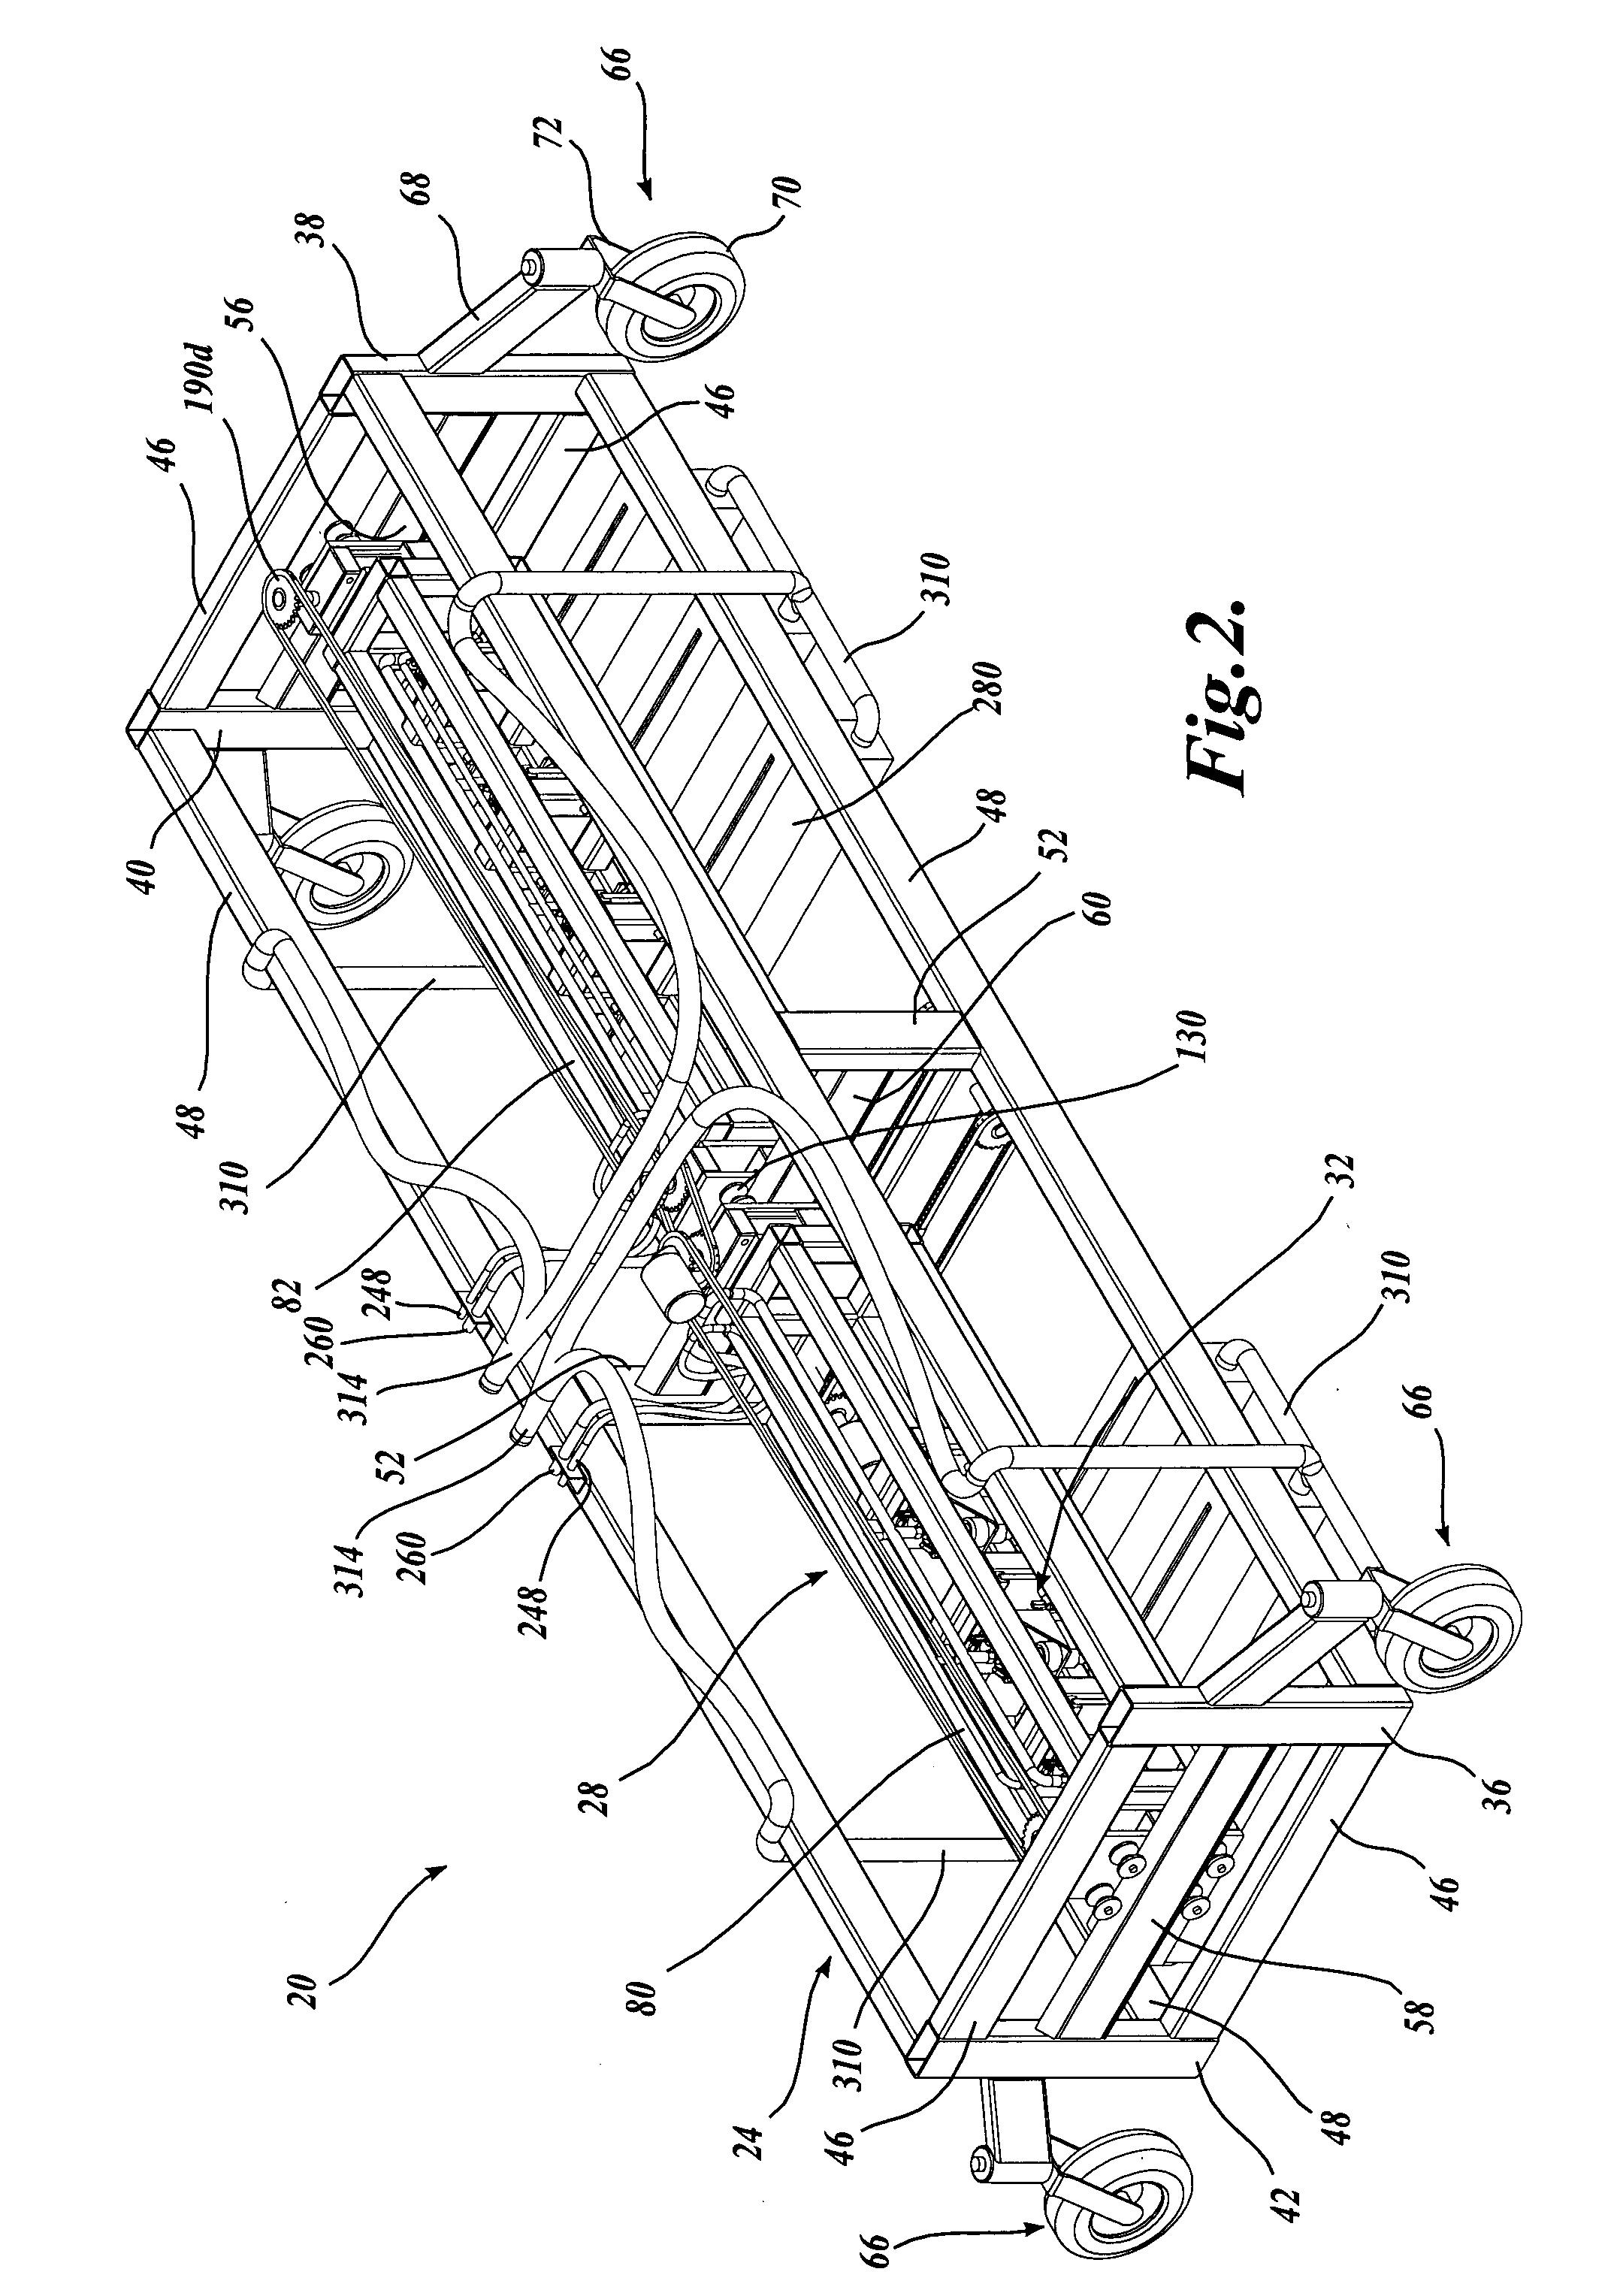 Substrate removal apparatus